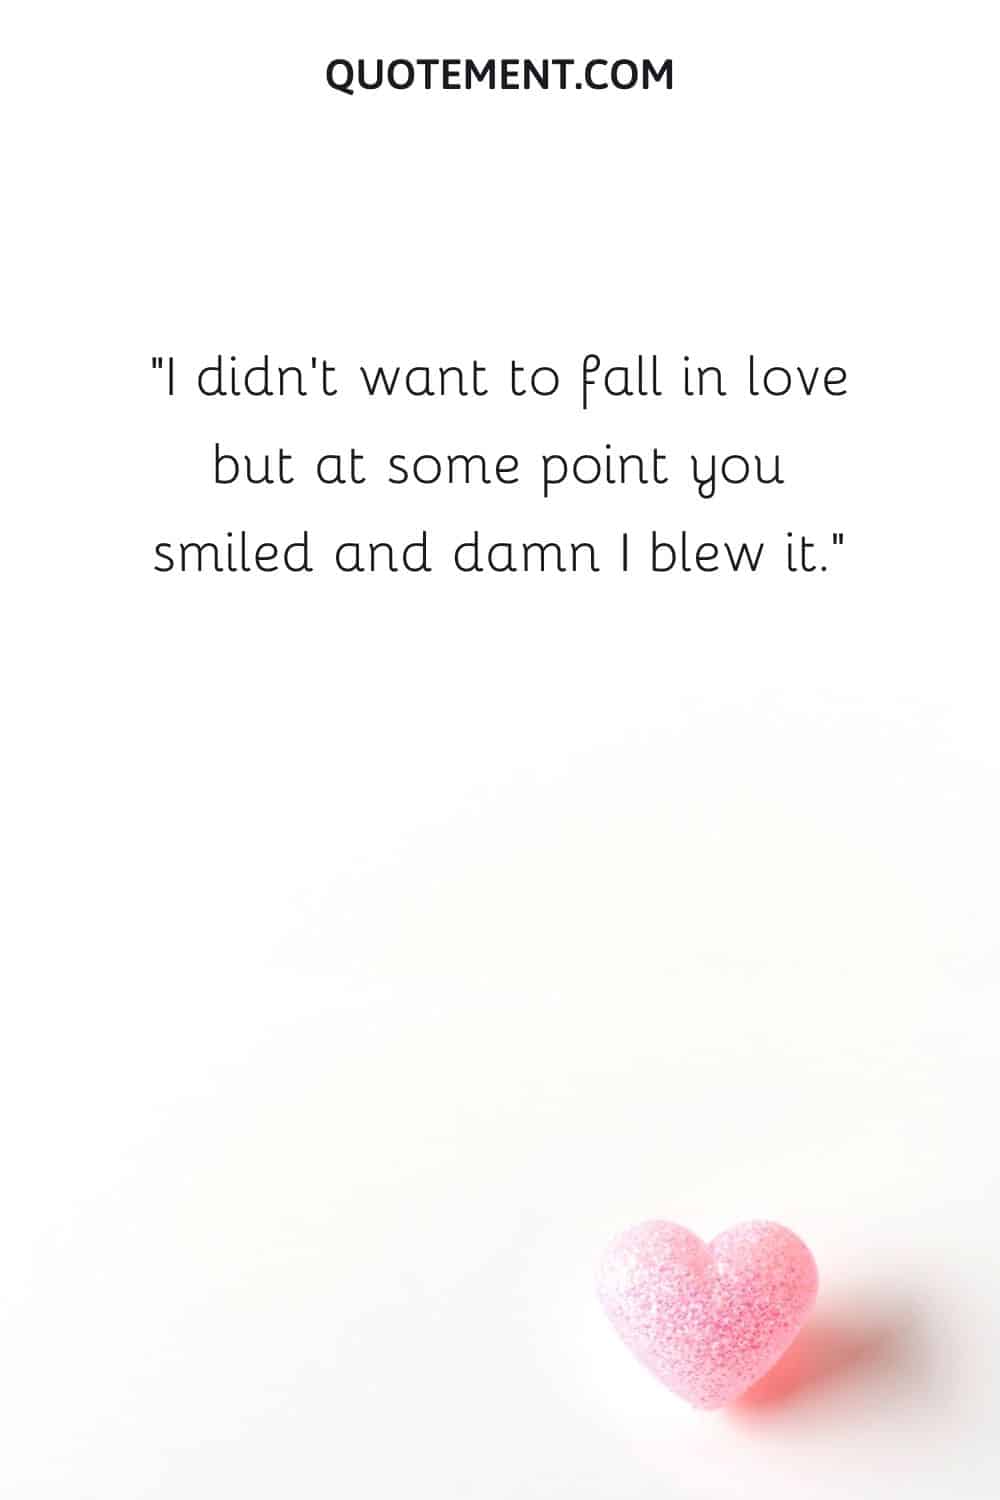 I didn't want to fall in love but at some point you smiled and damn I blew it.